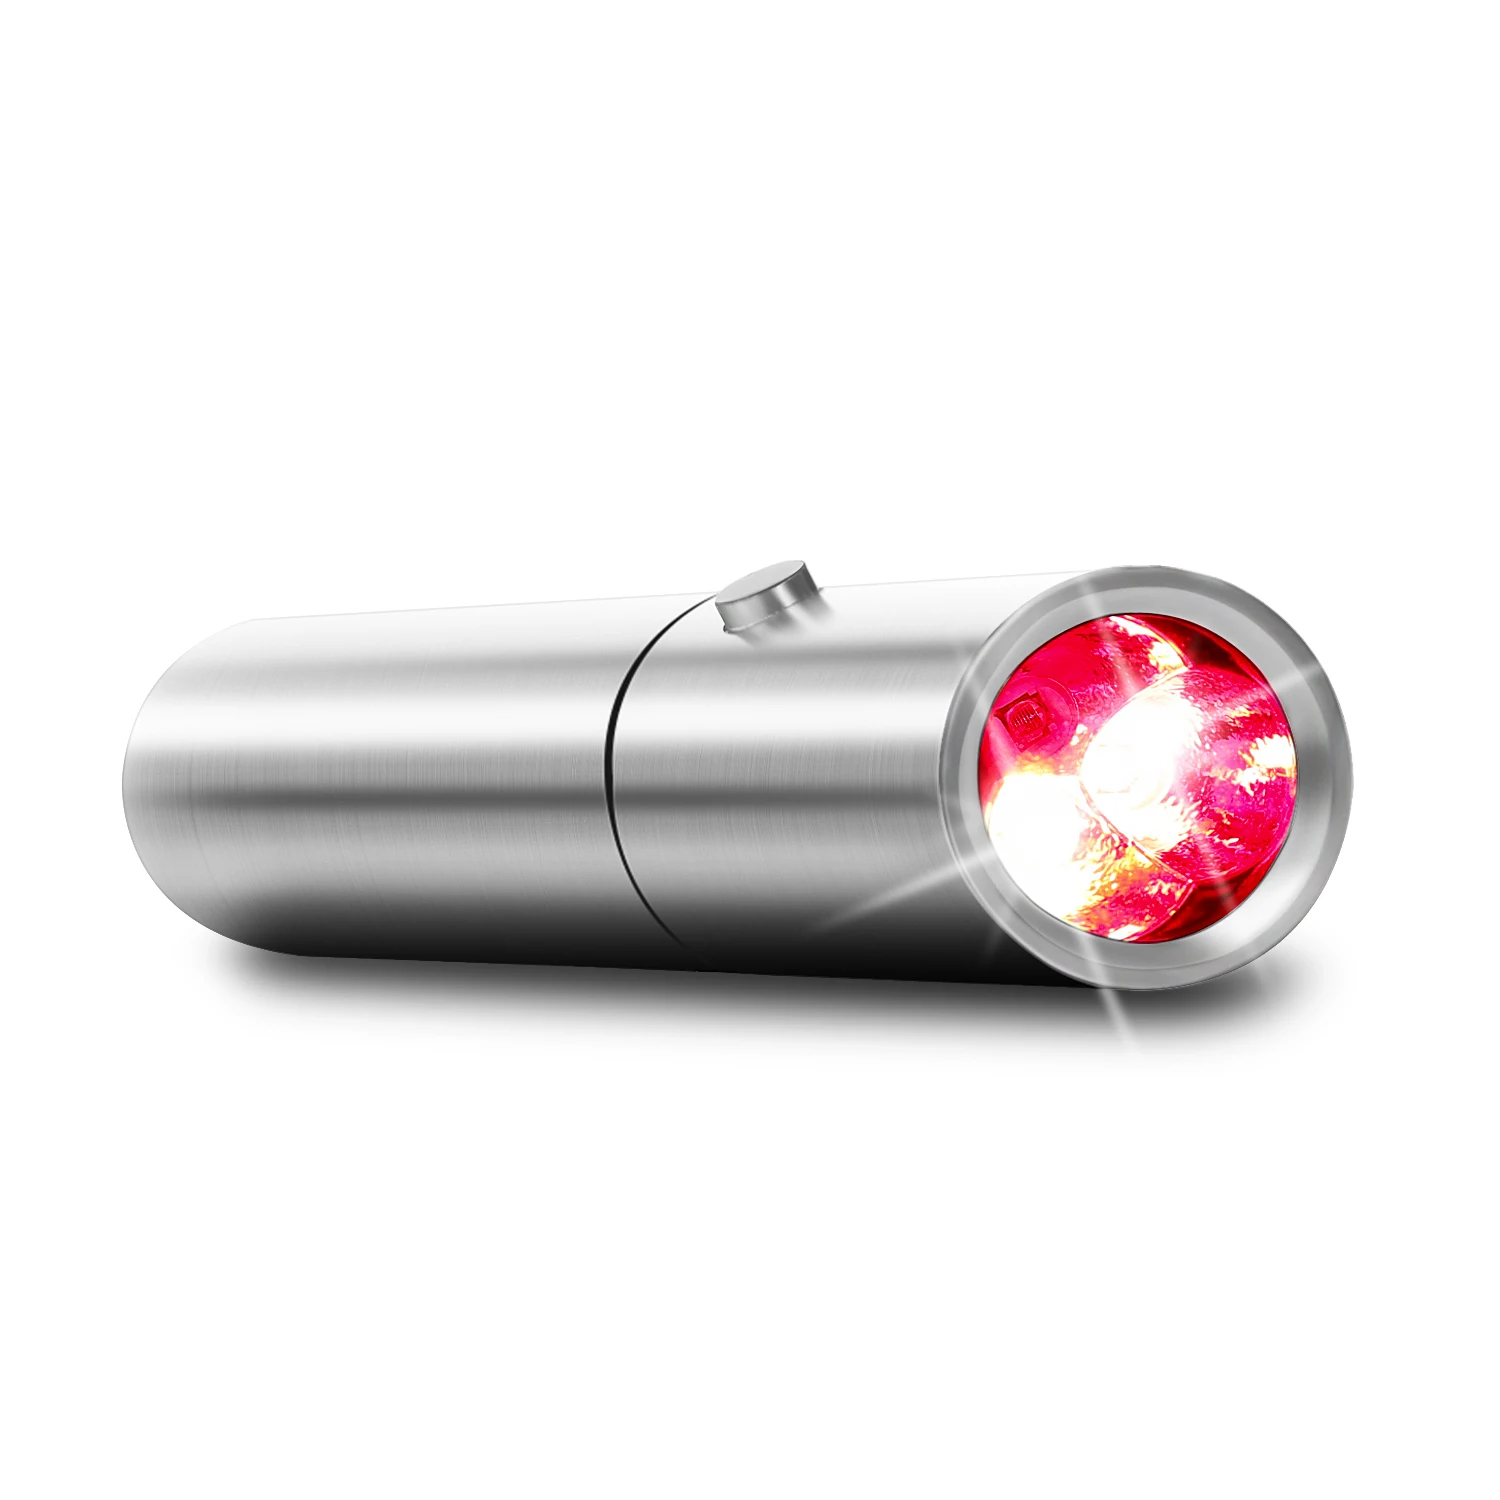 

Kinreen Infrared 660nm Medical Grade 850nm Mini Pen Near Torch Skin Lamp For Pain Red Led Light Therapy Device